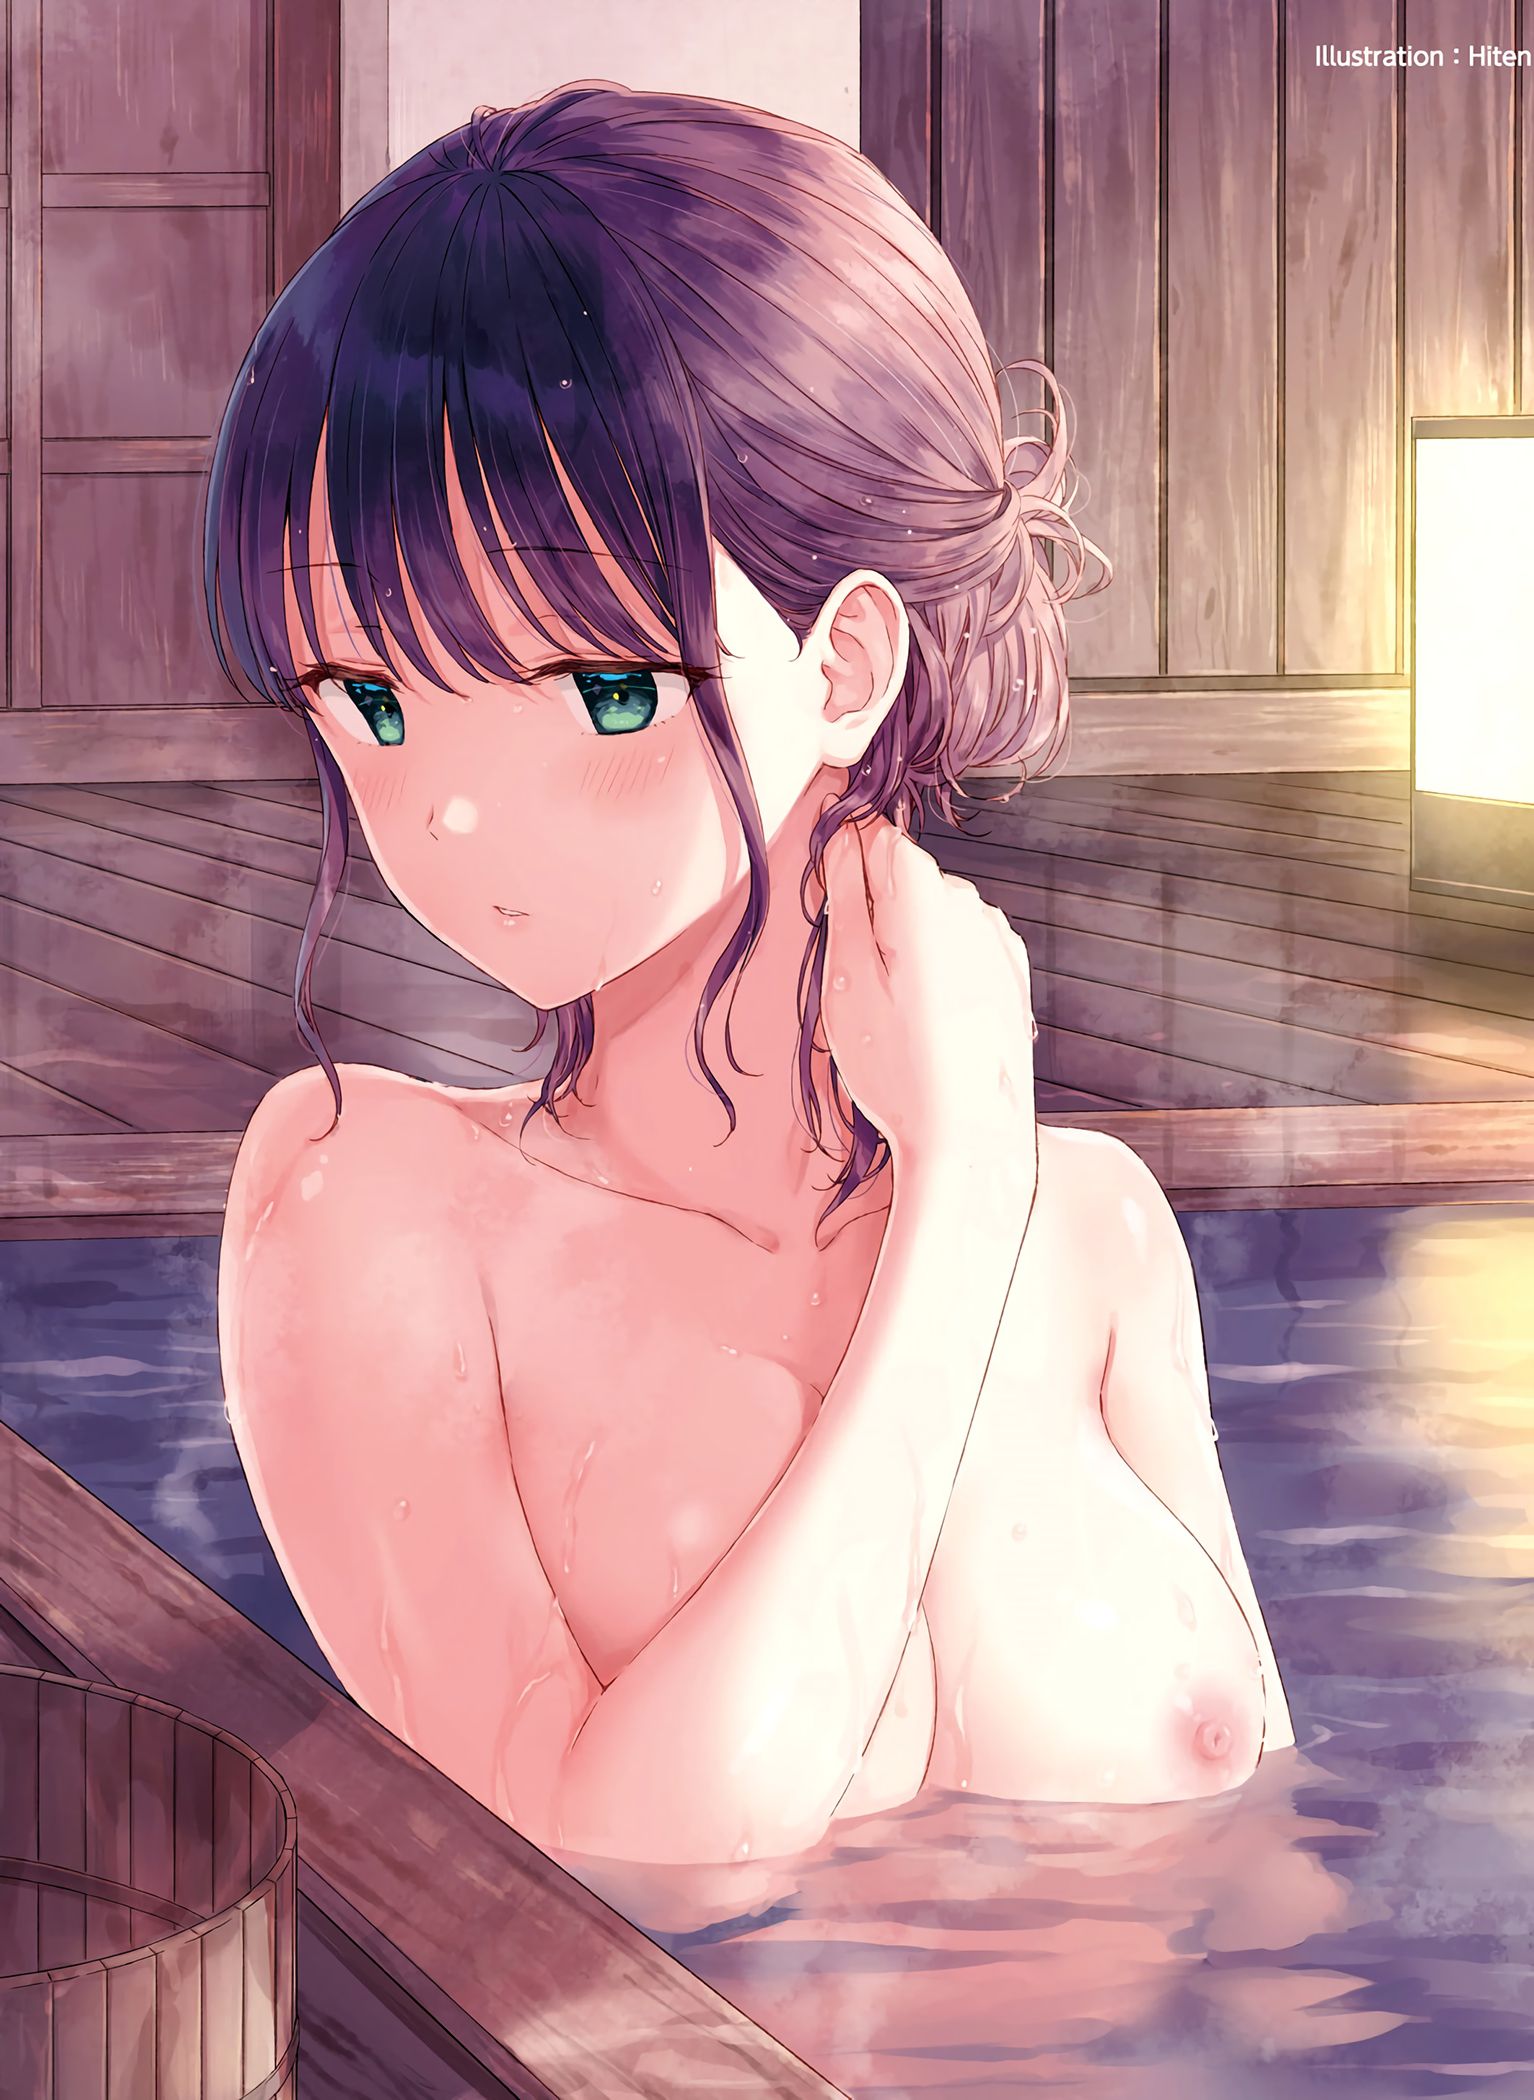 [Secondary erotic] × combination erotic image of a beautiful girl in a bath [50 sheets] 28